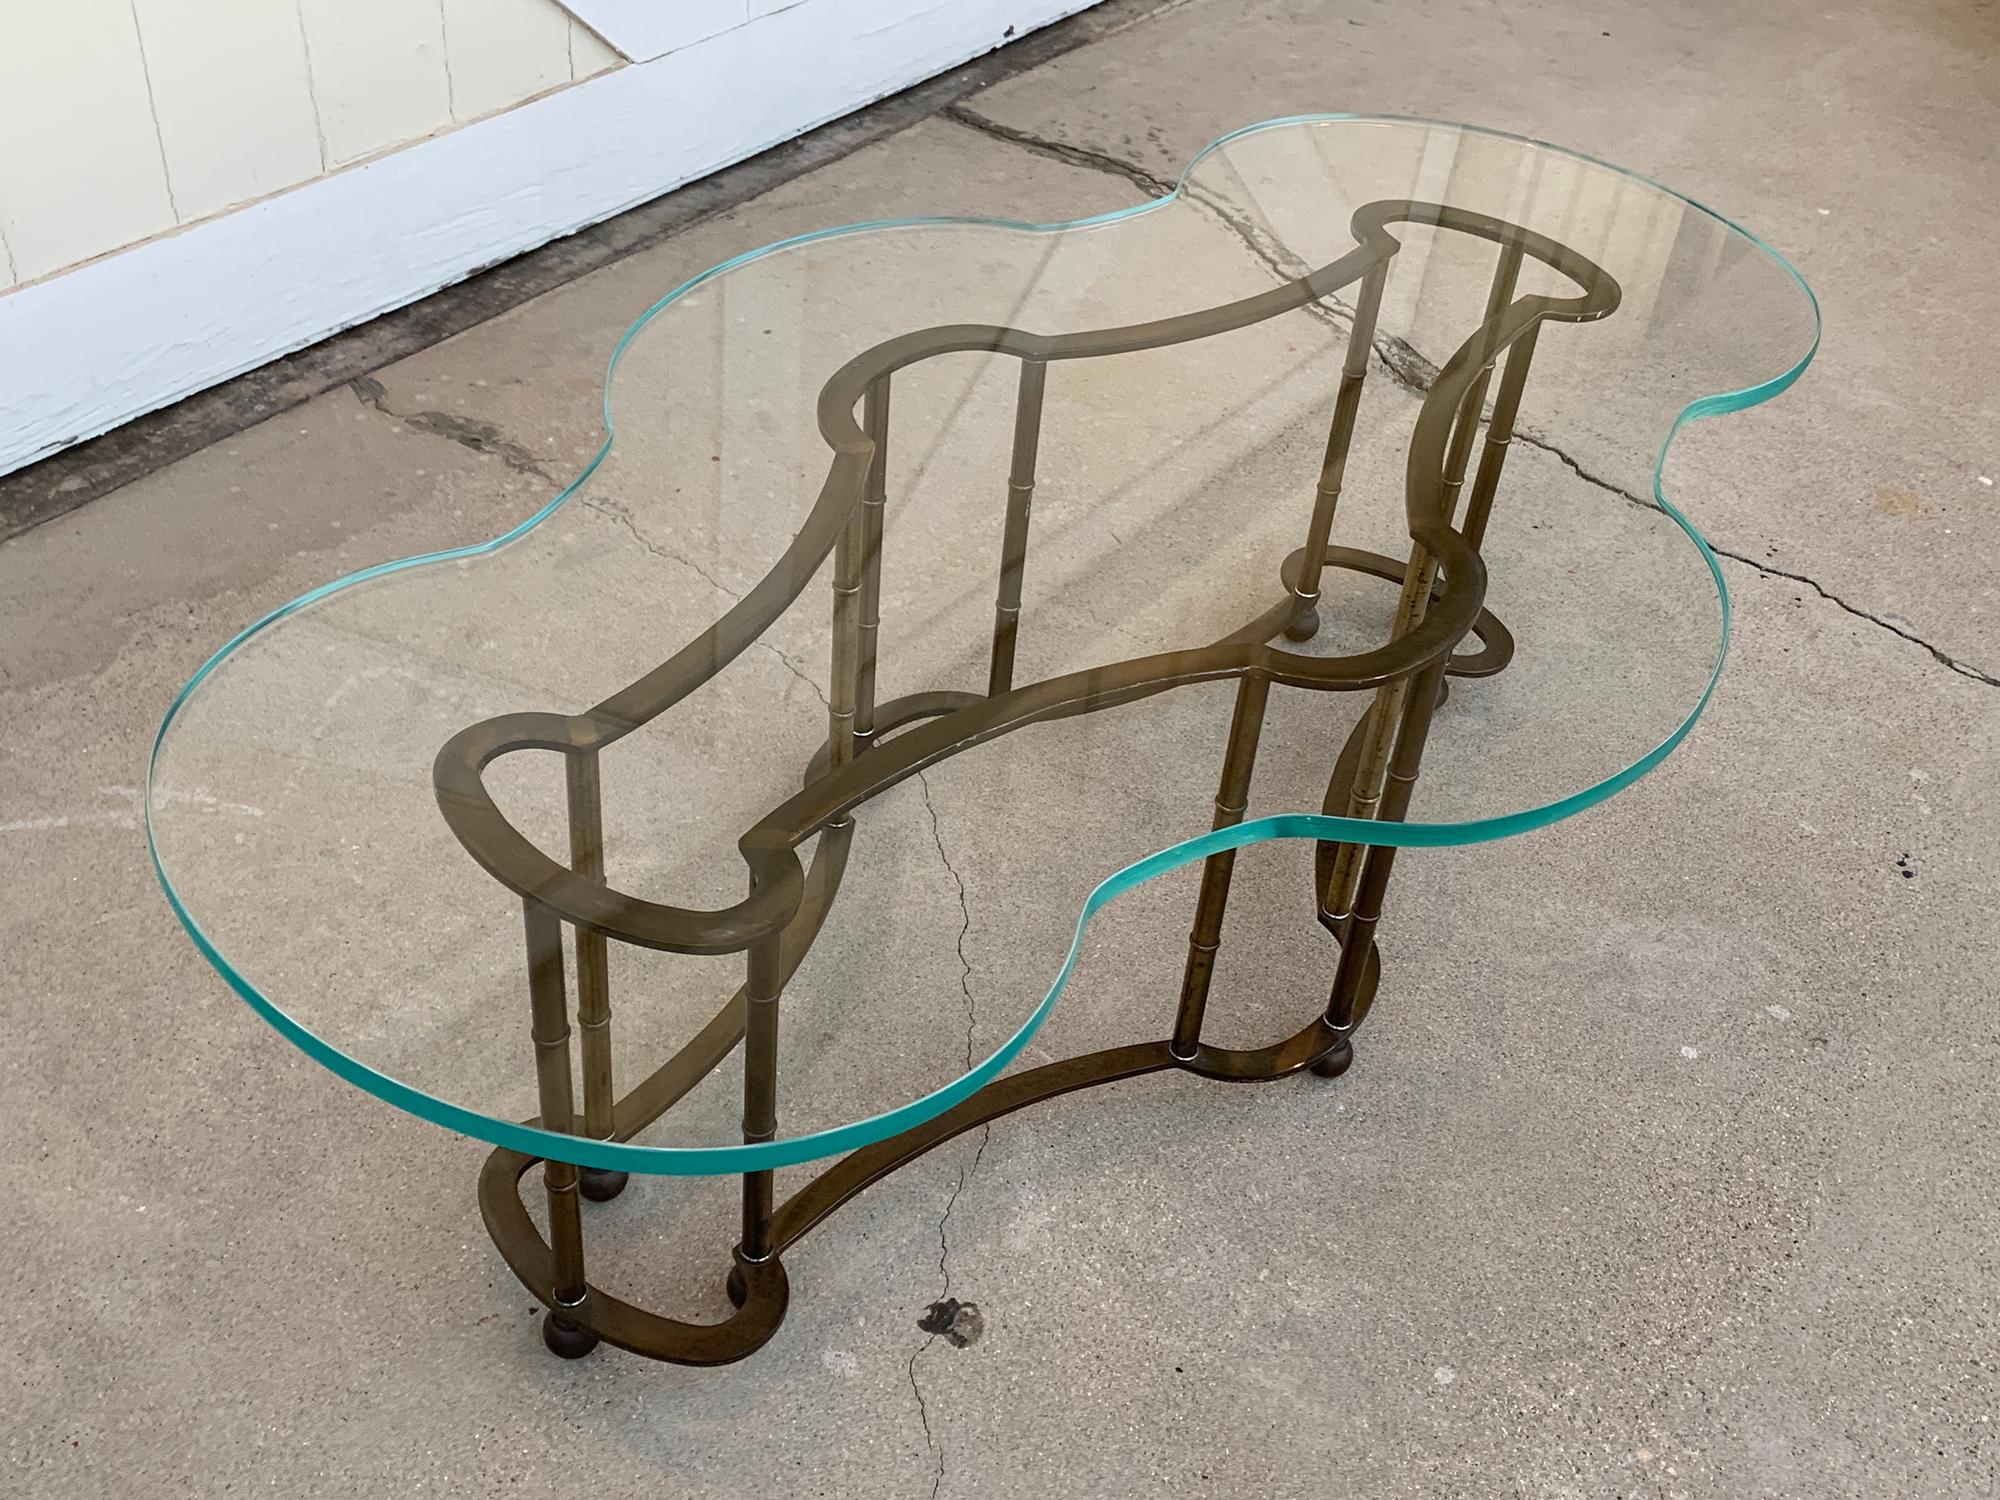 Freeform coffee table in brass and glass designed and manufactured by Mastercraft.
The table has beautiful freeform shaped with matching glass, the brass base has a beautiful antique patina and the glass has a beautiful water edged and freeform